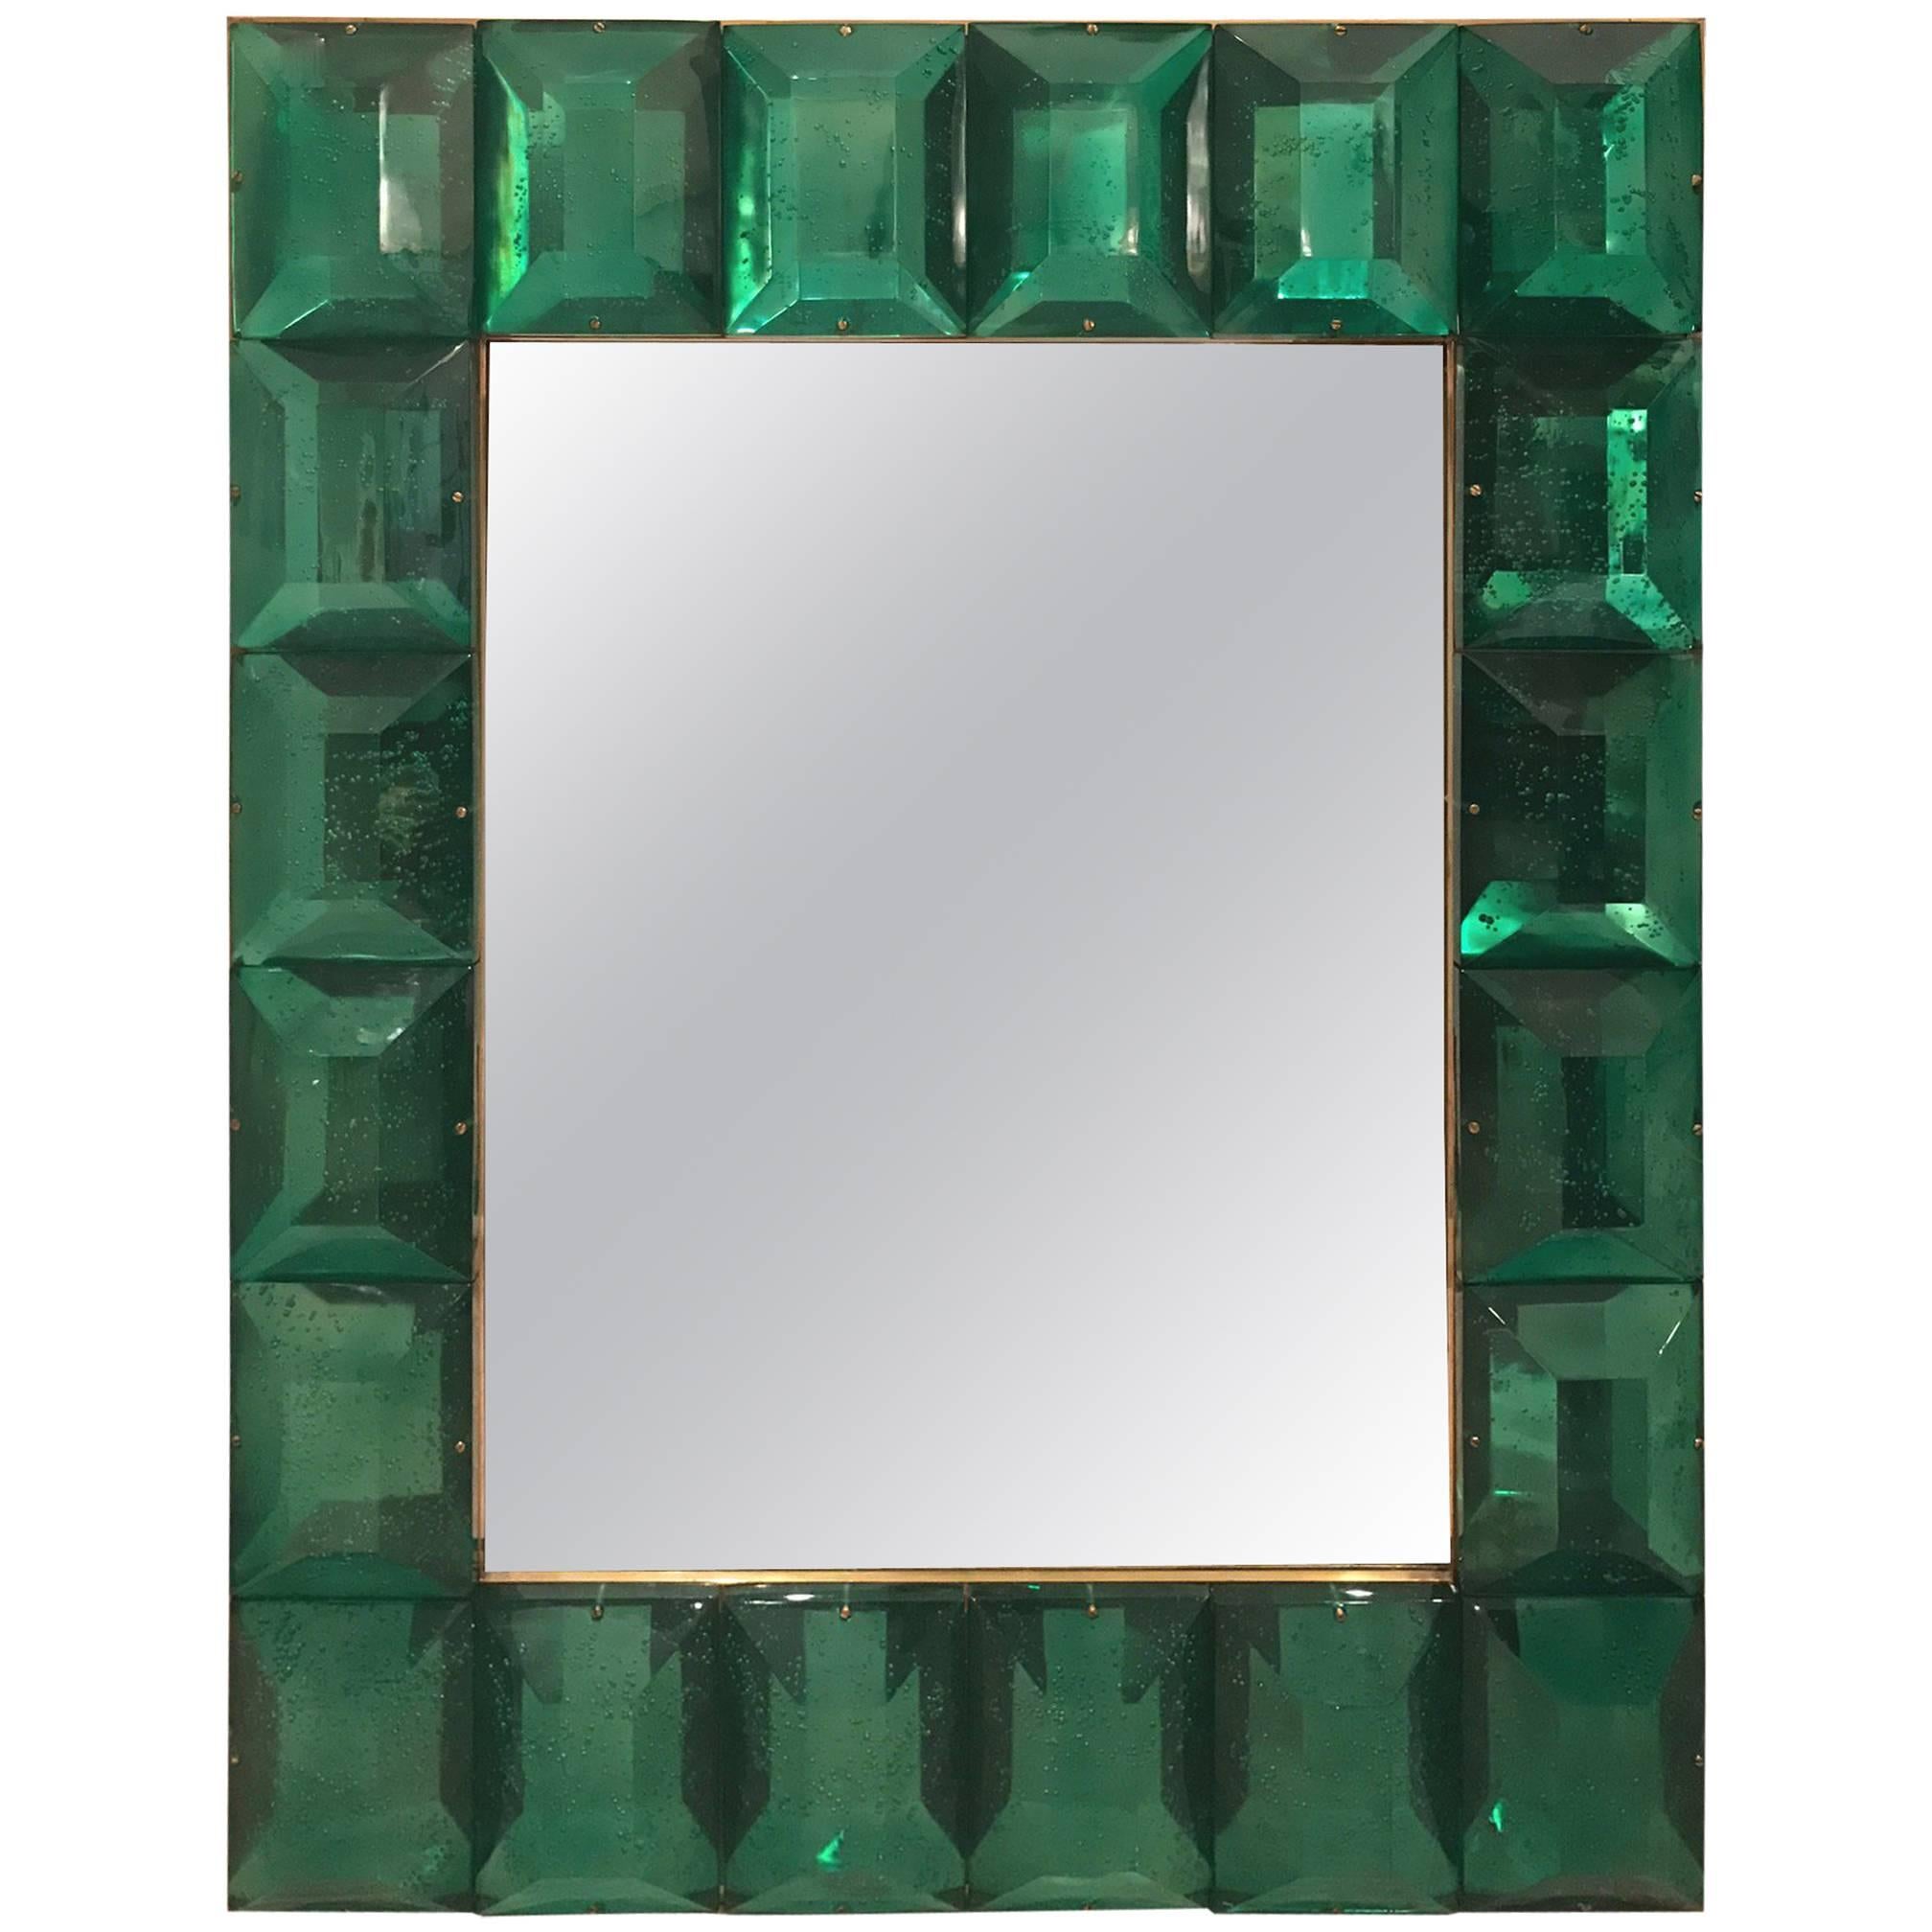  Customizable Faceted Murano Glass Mirror in Emerald Green